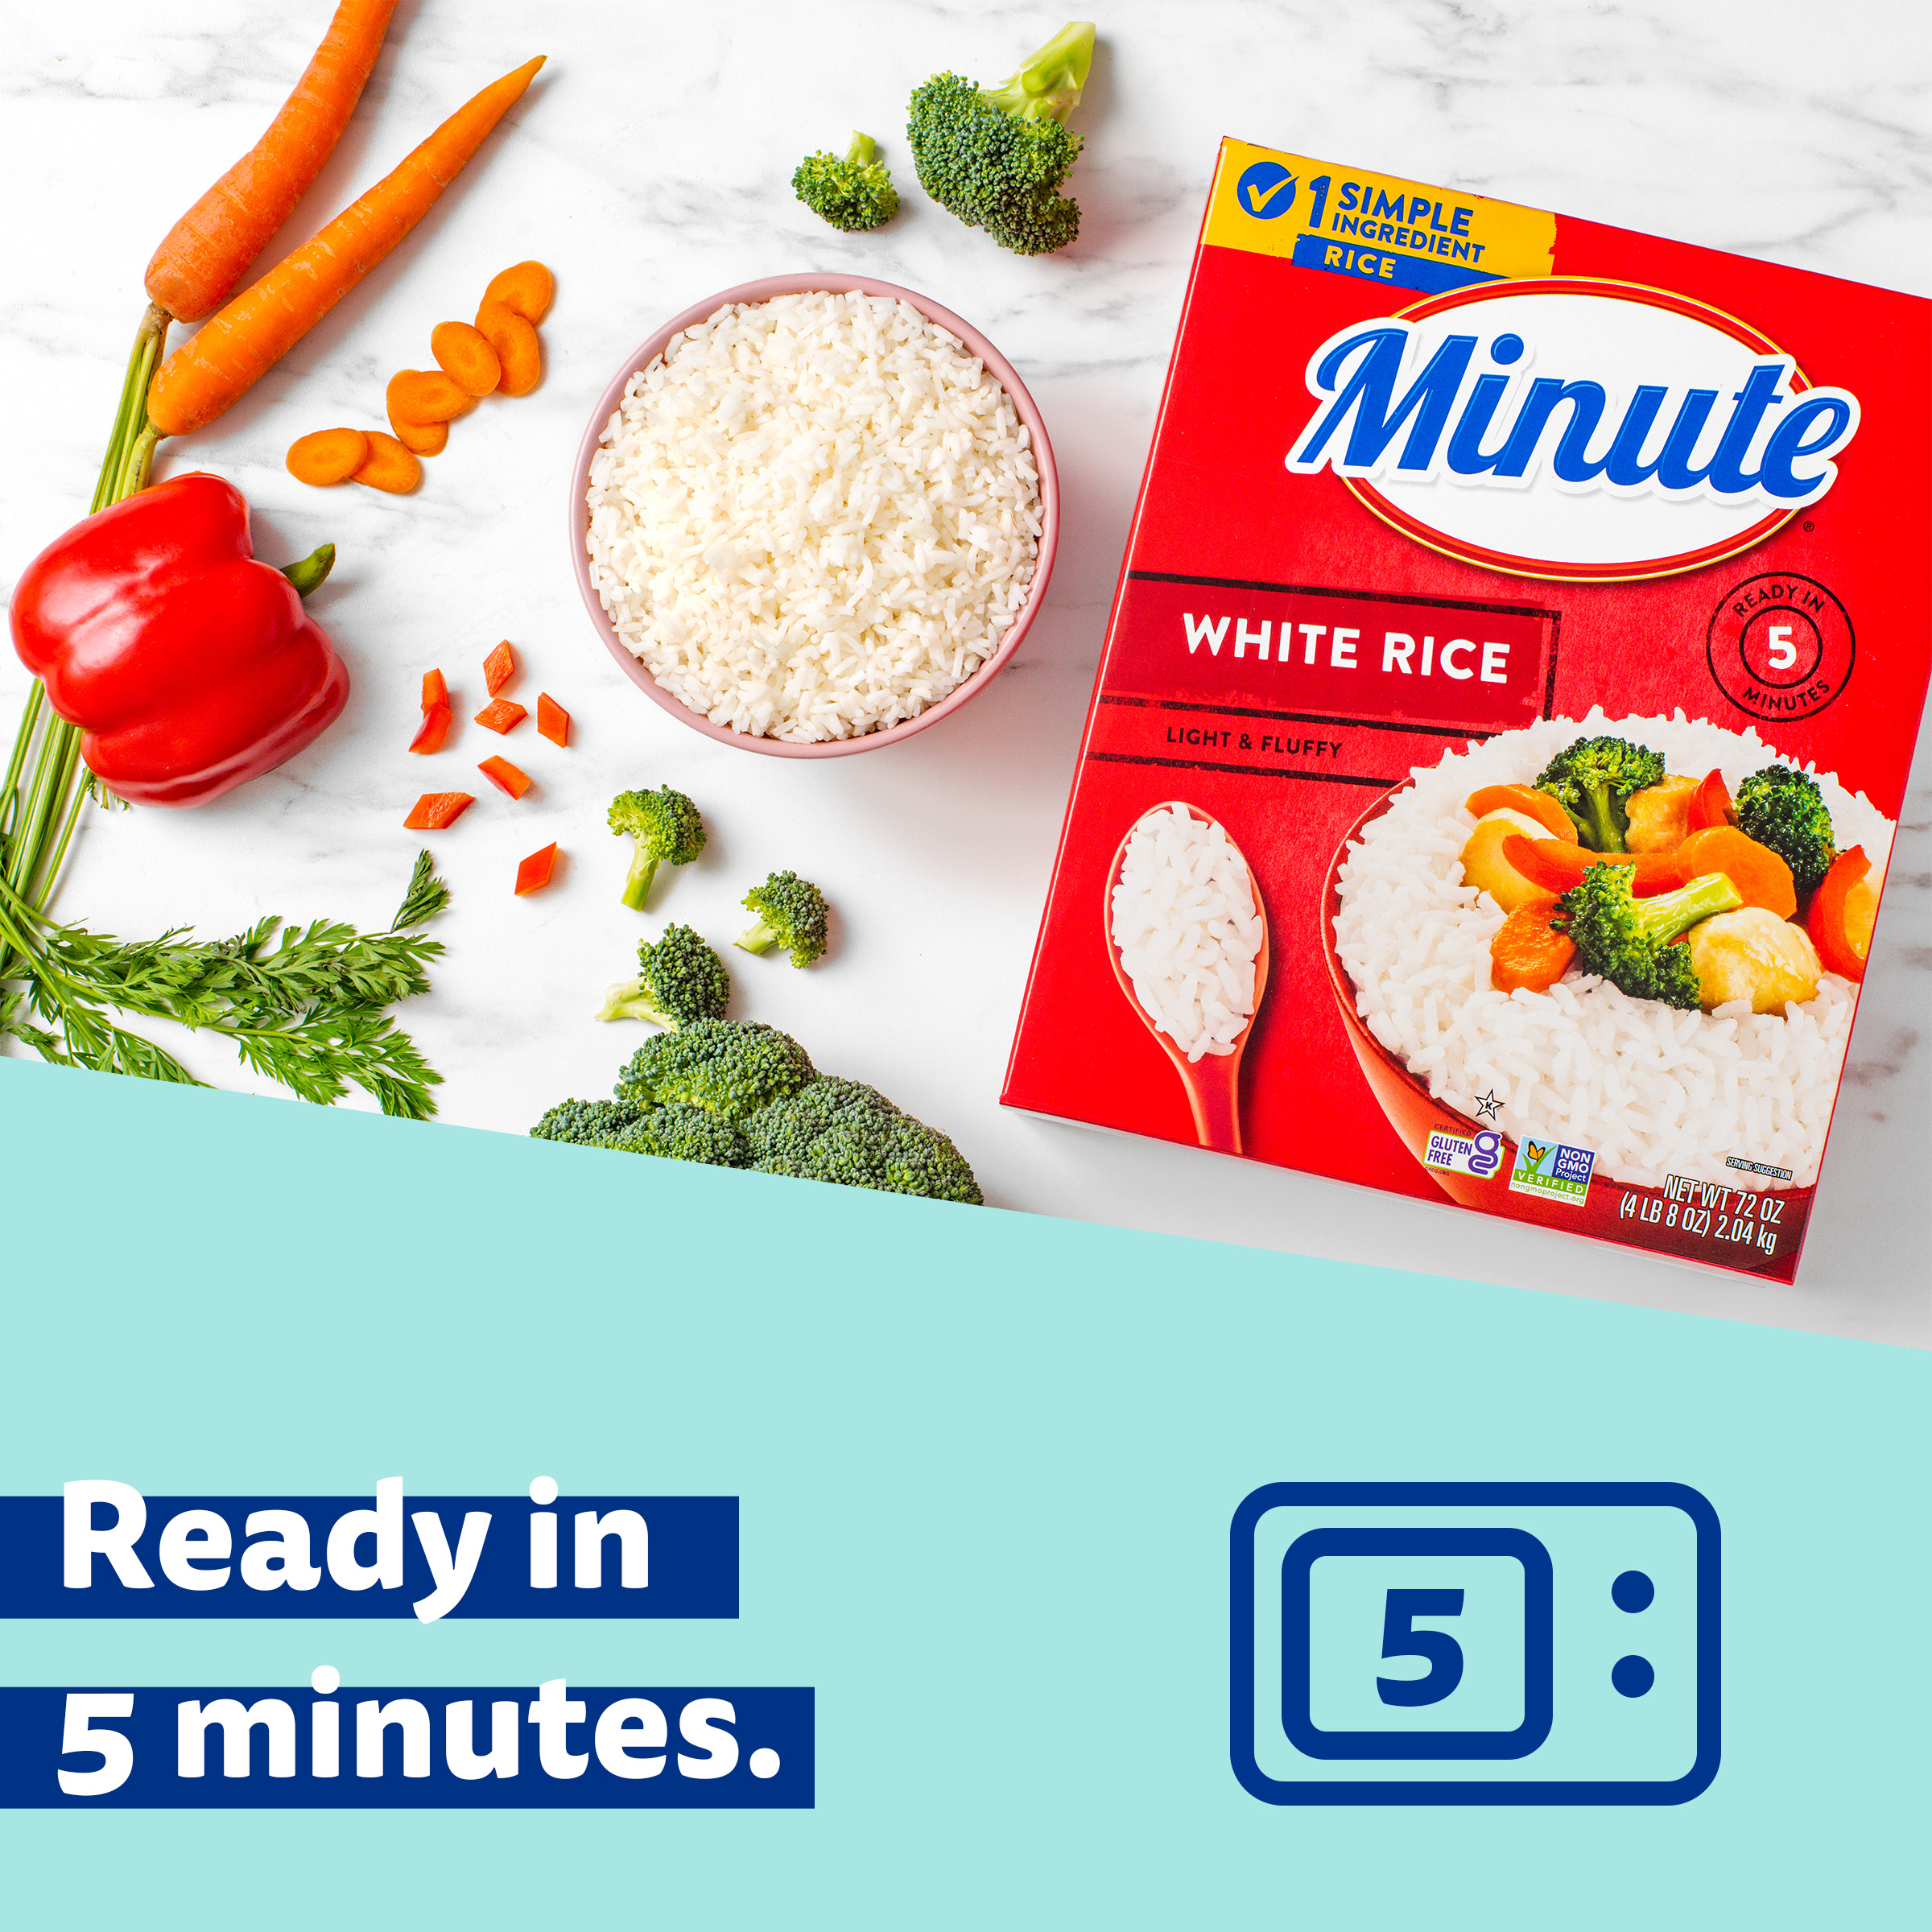 (4 pack) Minute Instant White Rice, Light and Fluffy, 72 oz - image 4 of 9